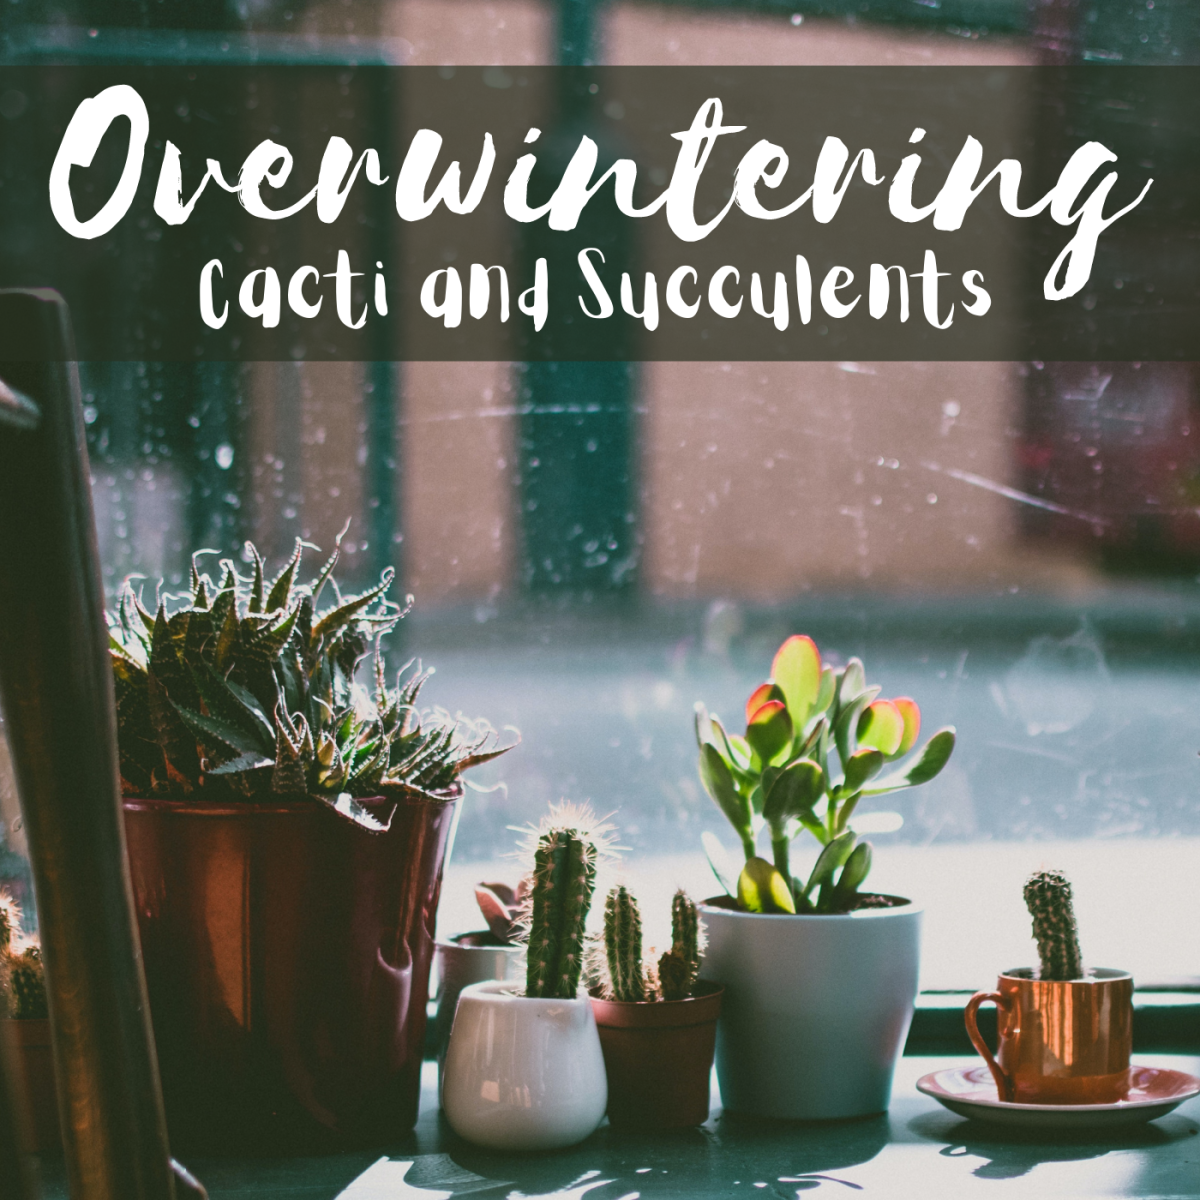 Do Cacti and Succulents Need to Come Inside for the Winter?